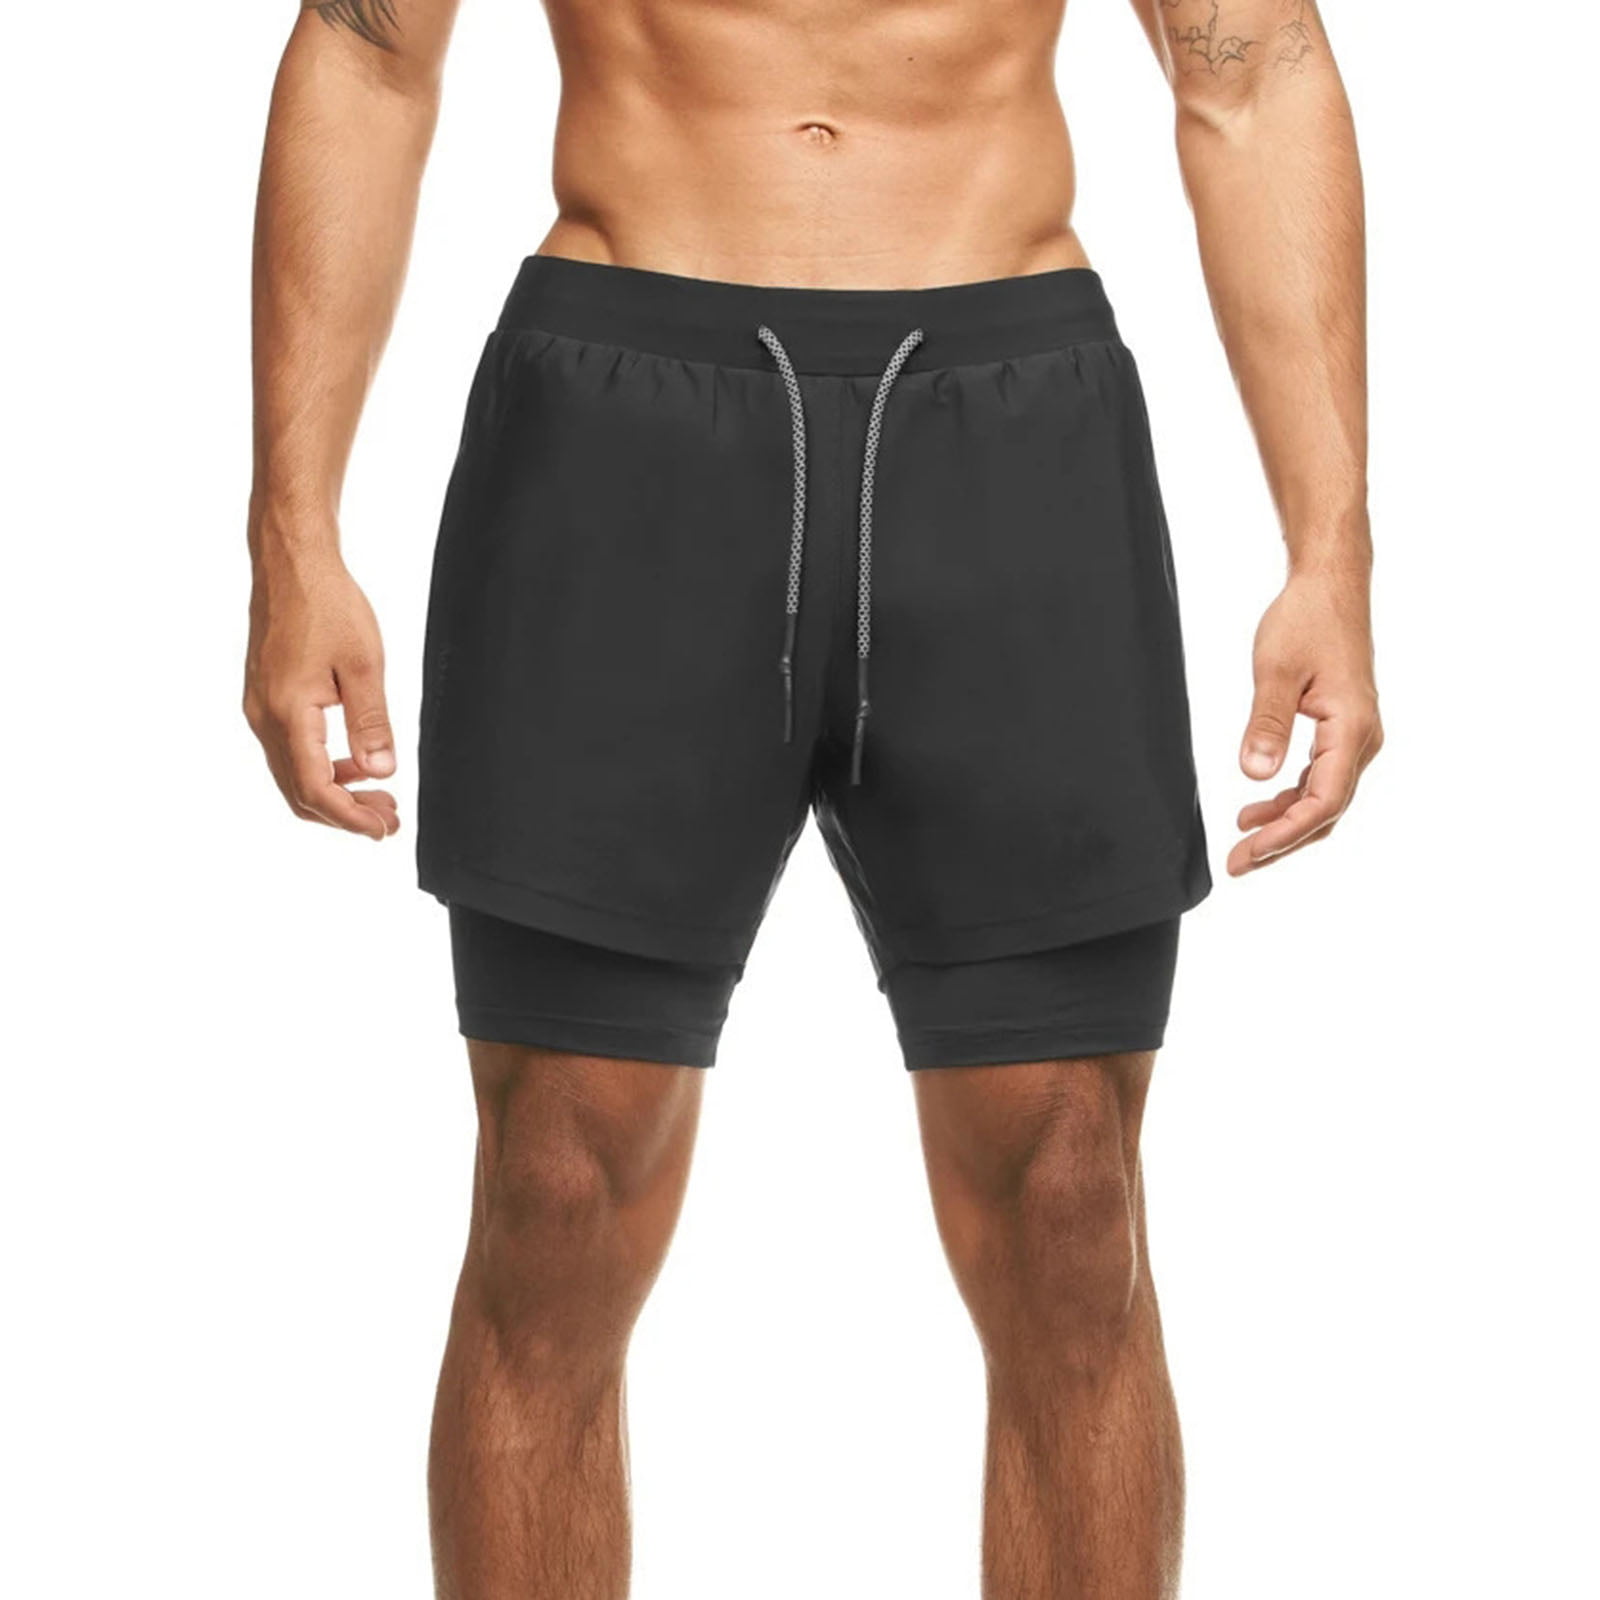 Details about   Men 2 in1 Compression Shorts Running Training Athletic Gym Lightweight Quick Dry 